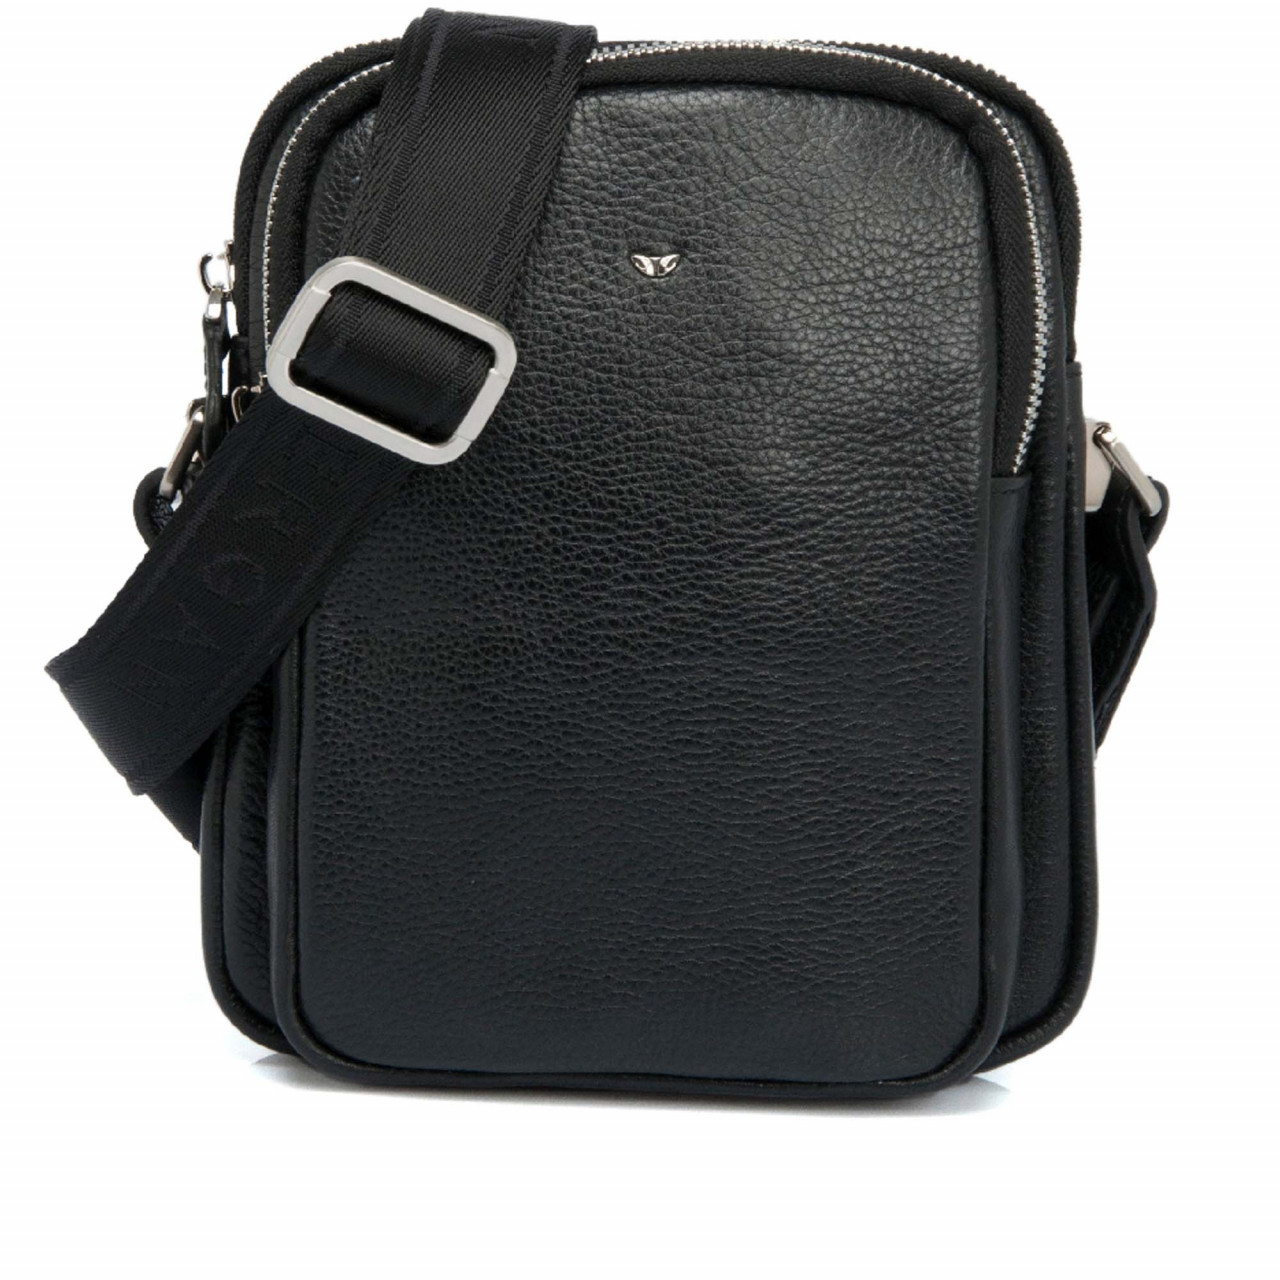 Small Genuine Leather Cross Body Messenger Bags